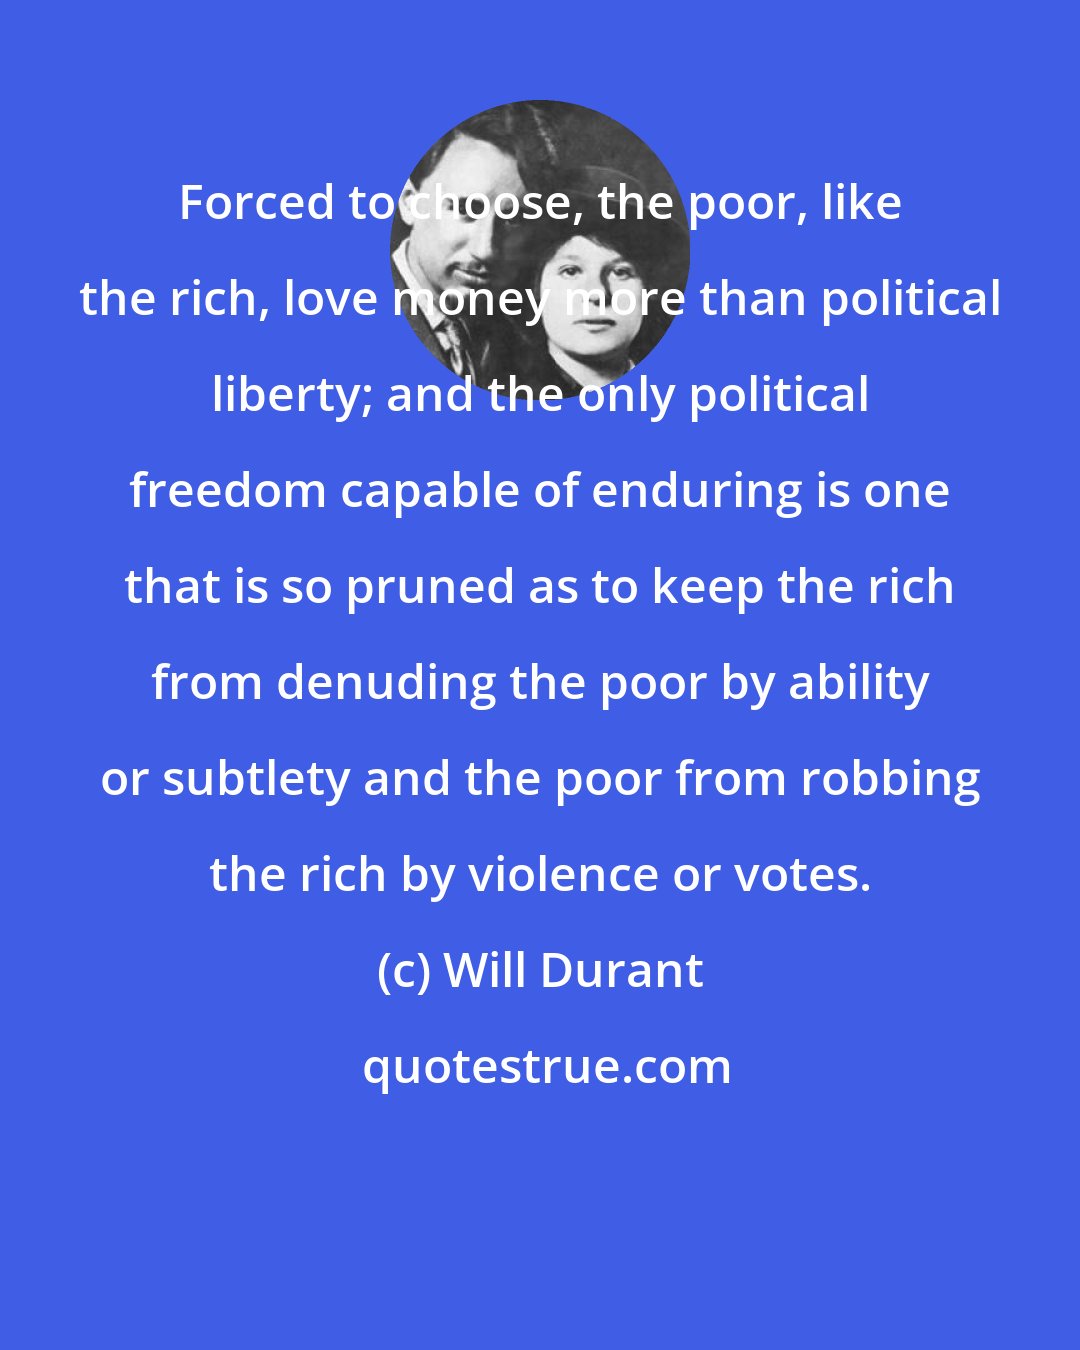 Will Durant: Forced to choose, the poor, like the rich, love money more than political liberty; and the only political freedom capable of enduring is one that is so pruned as to keep the rich from denuding the poor by ability or subtlety and the poor from robbing the rich by violence or votes.